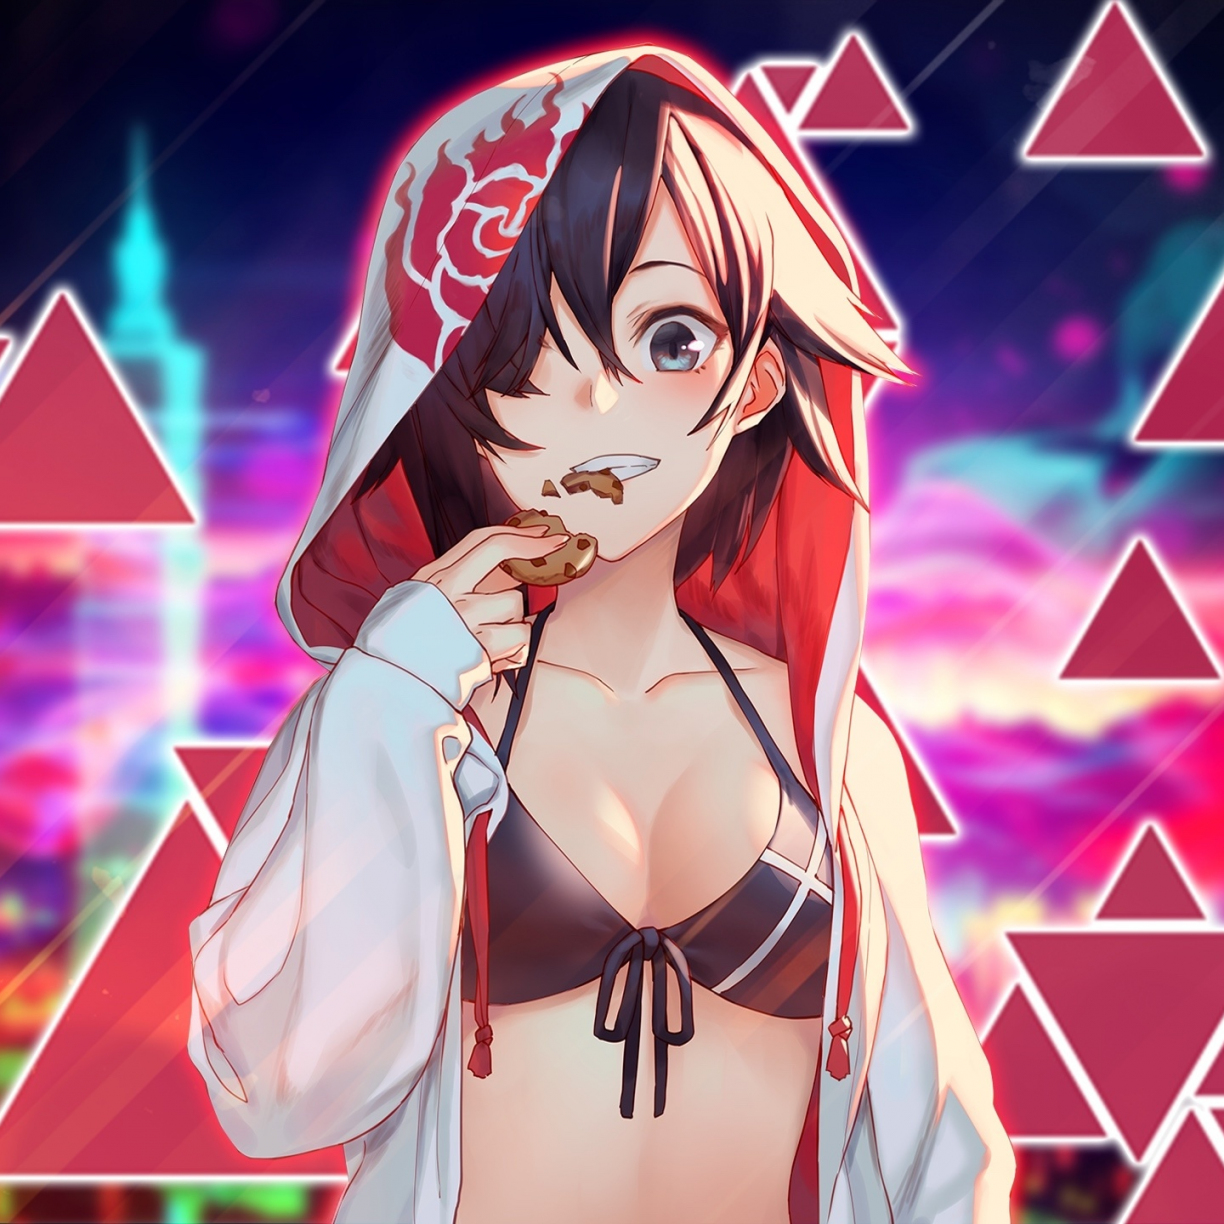 Wallpaper hot, anime girl and cookie, curious desktop wallpaper, hd image,  picture, background, 1e31d7 | wallpapersmug